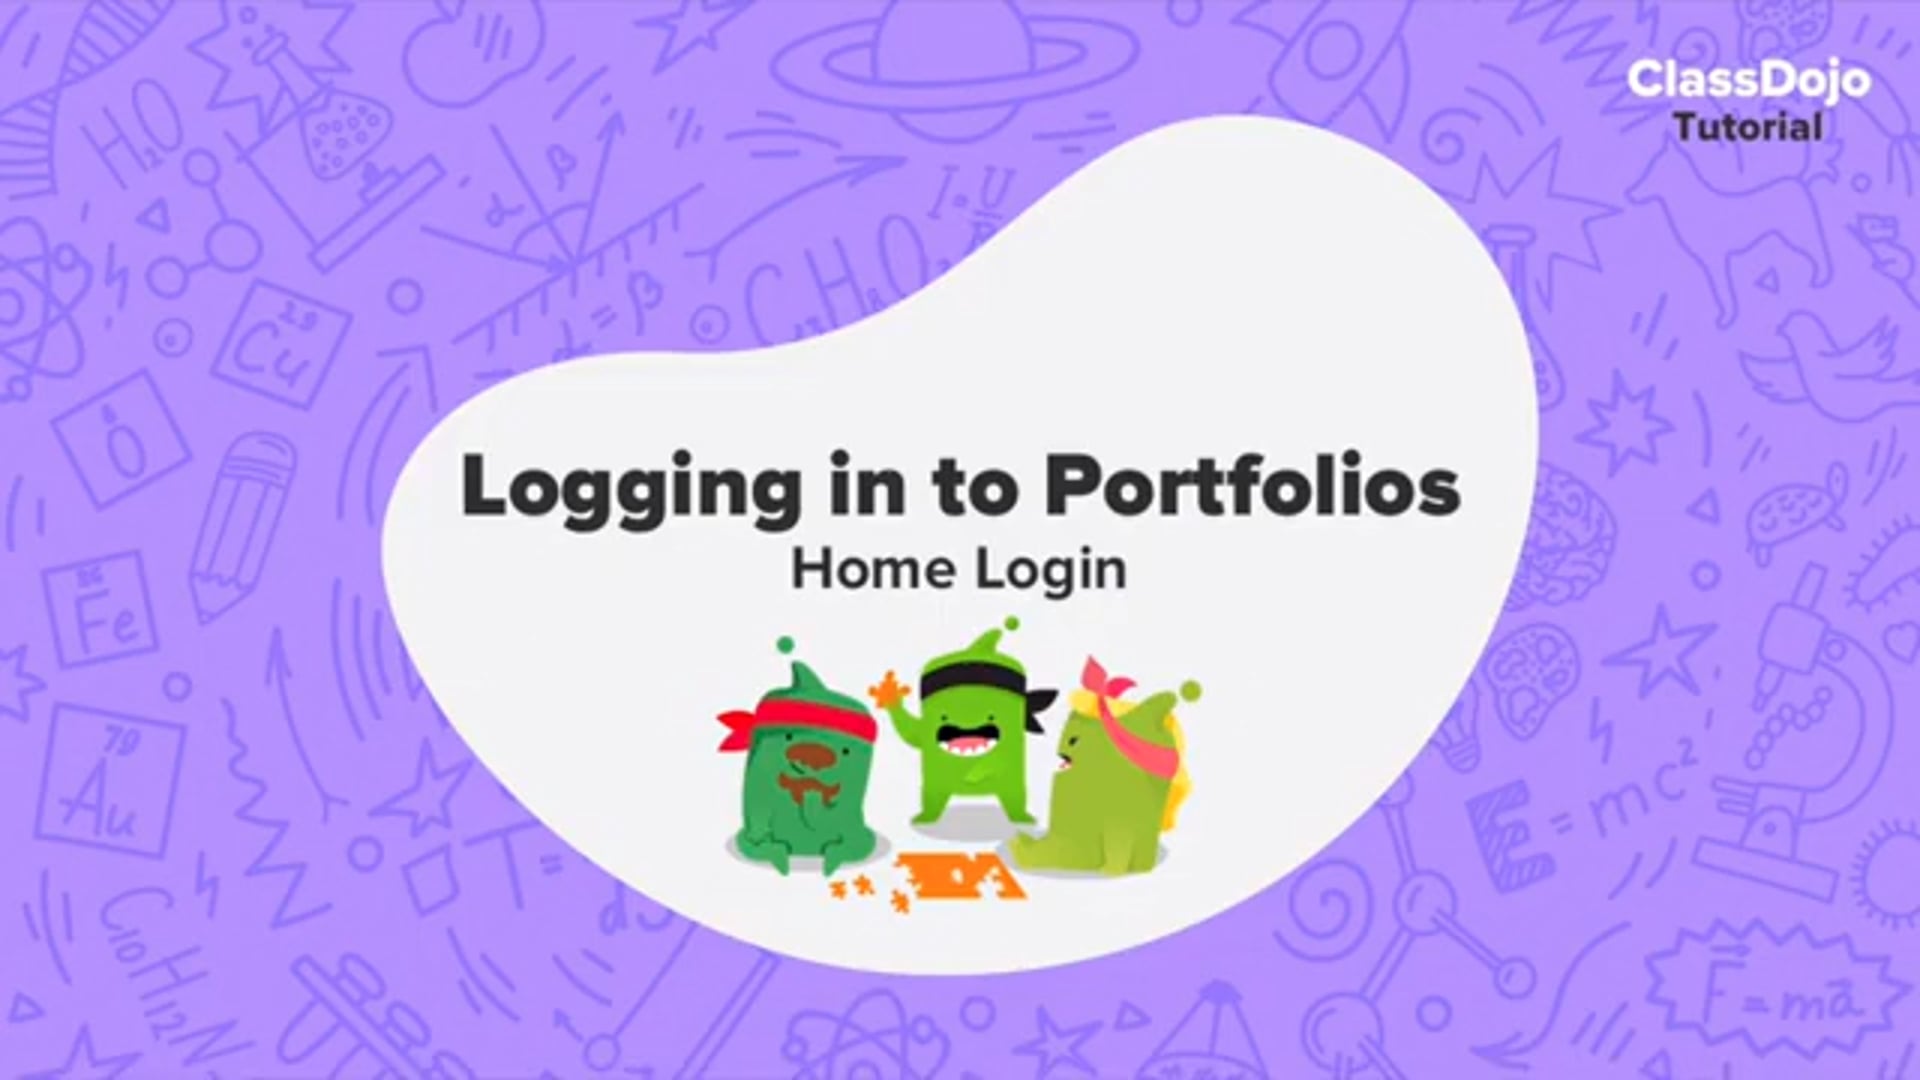 Student Login - How to create your Student Account in Class Dojo